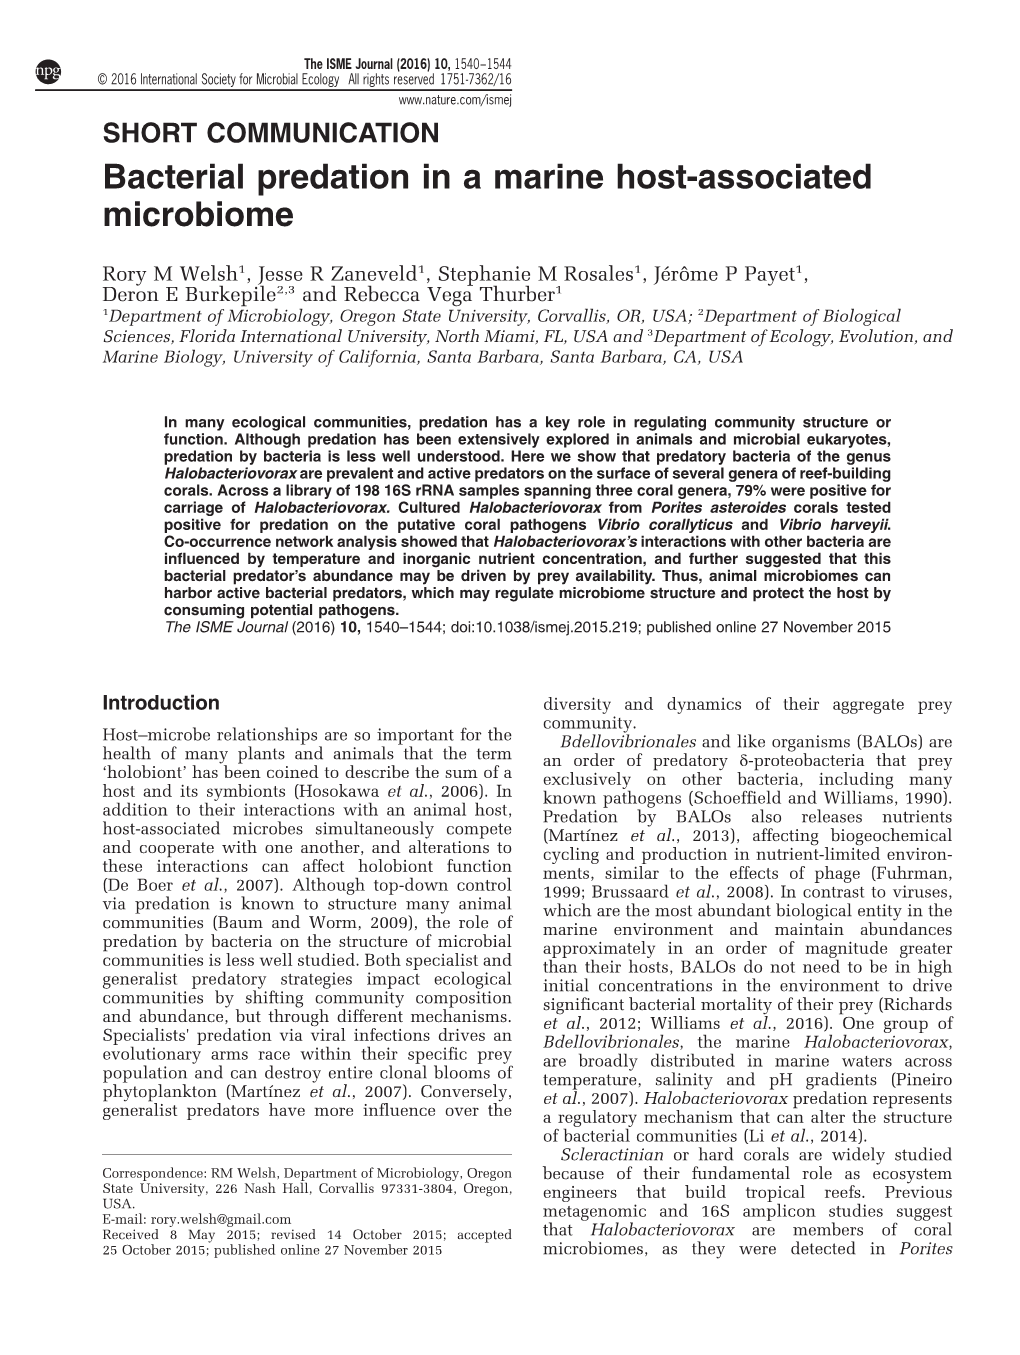 Bacterial Predation in a Marine Host-Associated Microbiome